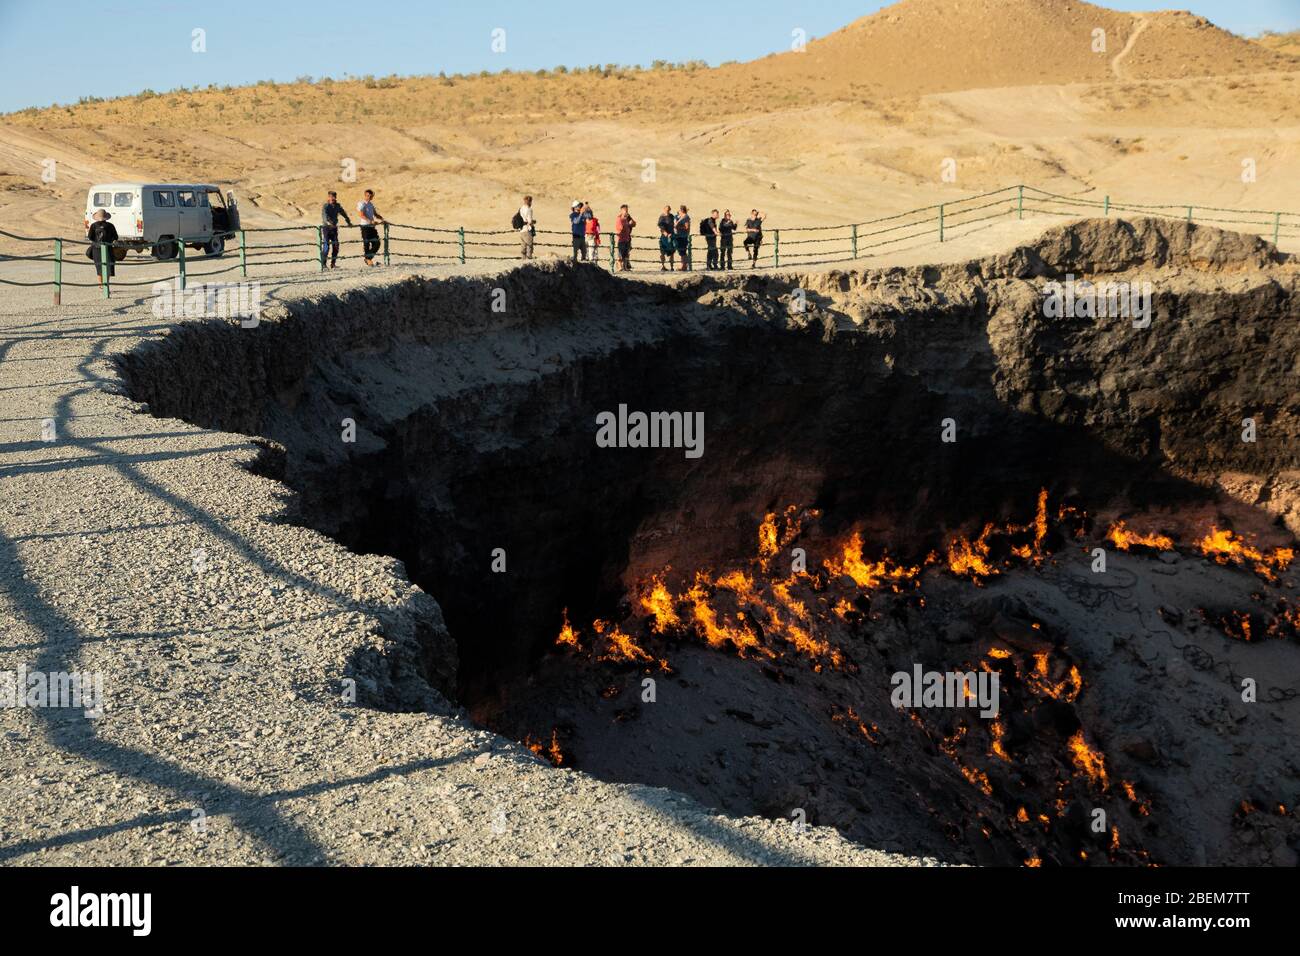 People standing by the edge of The Darvasa Crater, also known as the Doorway to Hell, the flaming gas crater in Darvaza (Darvasa), Turkmenistan Stock Photo